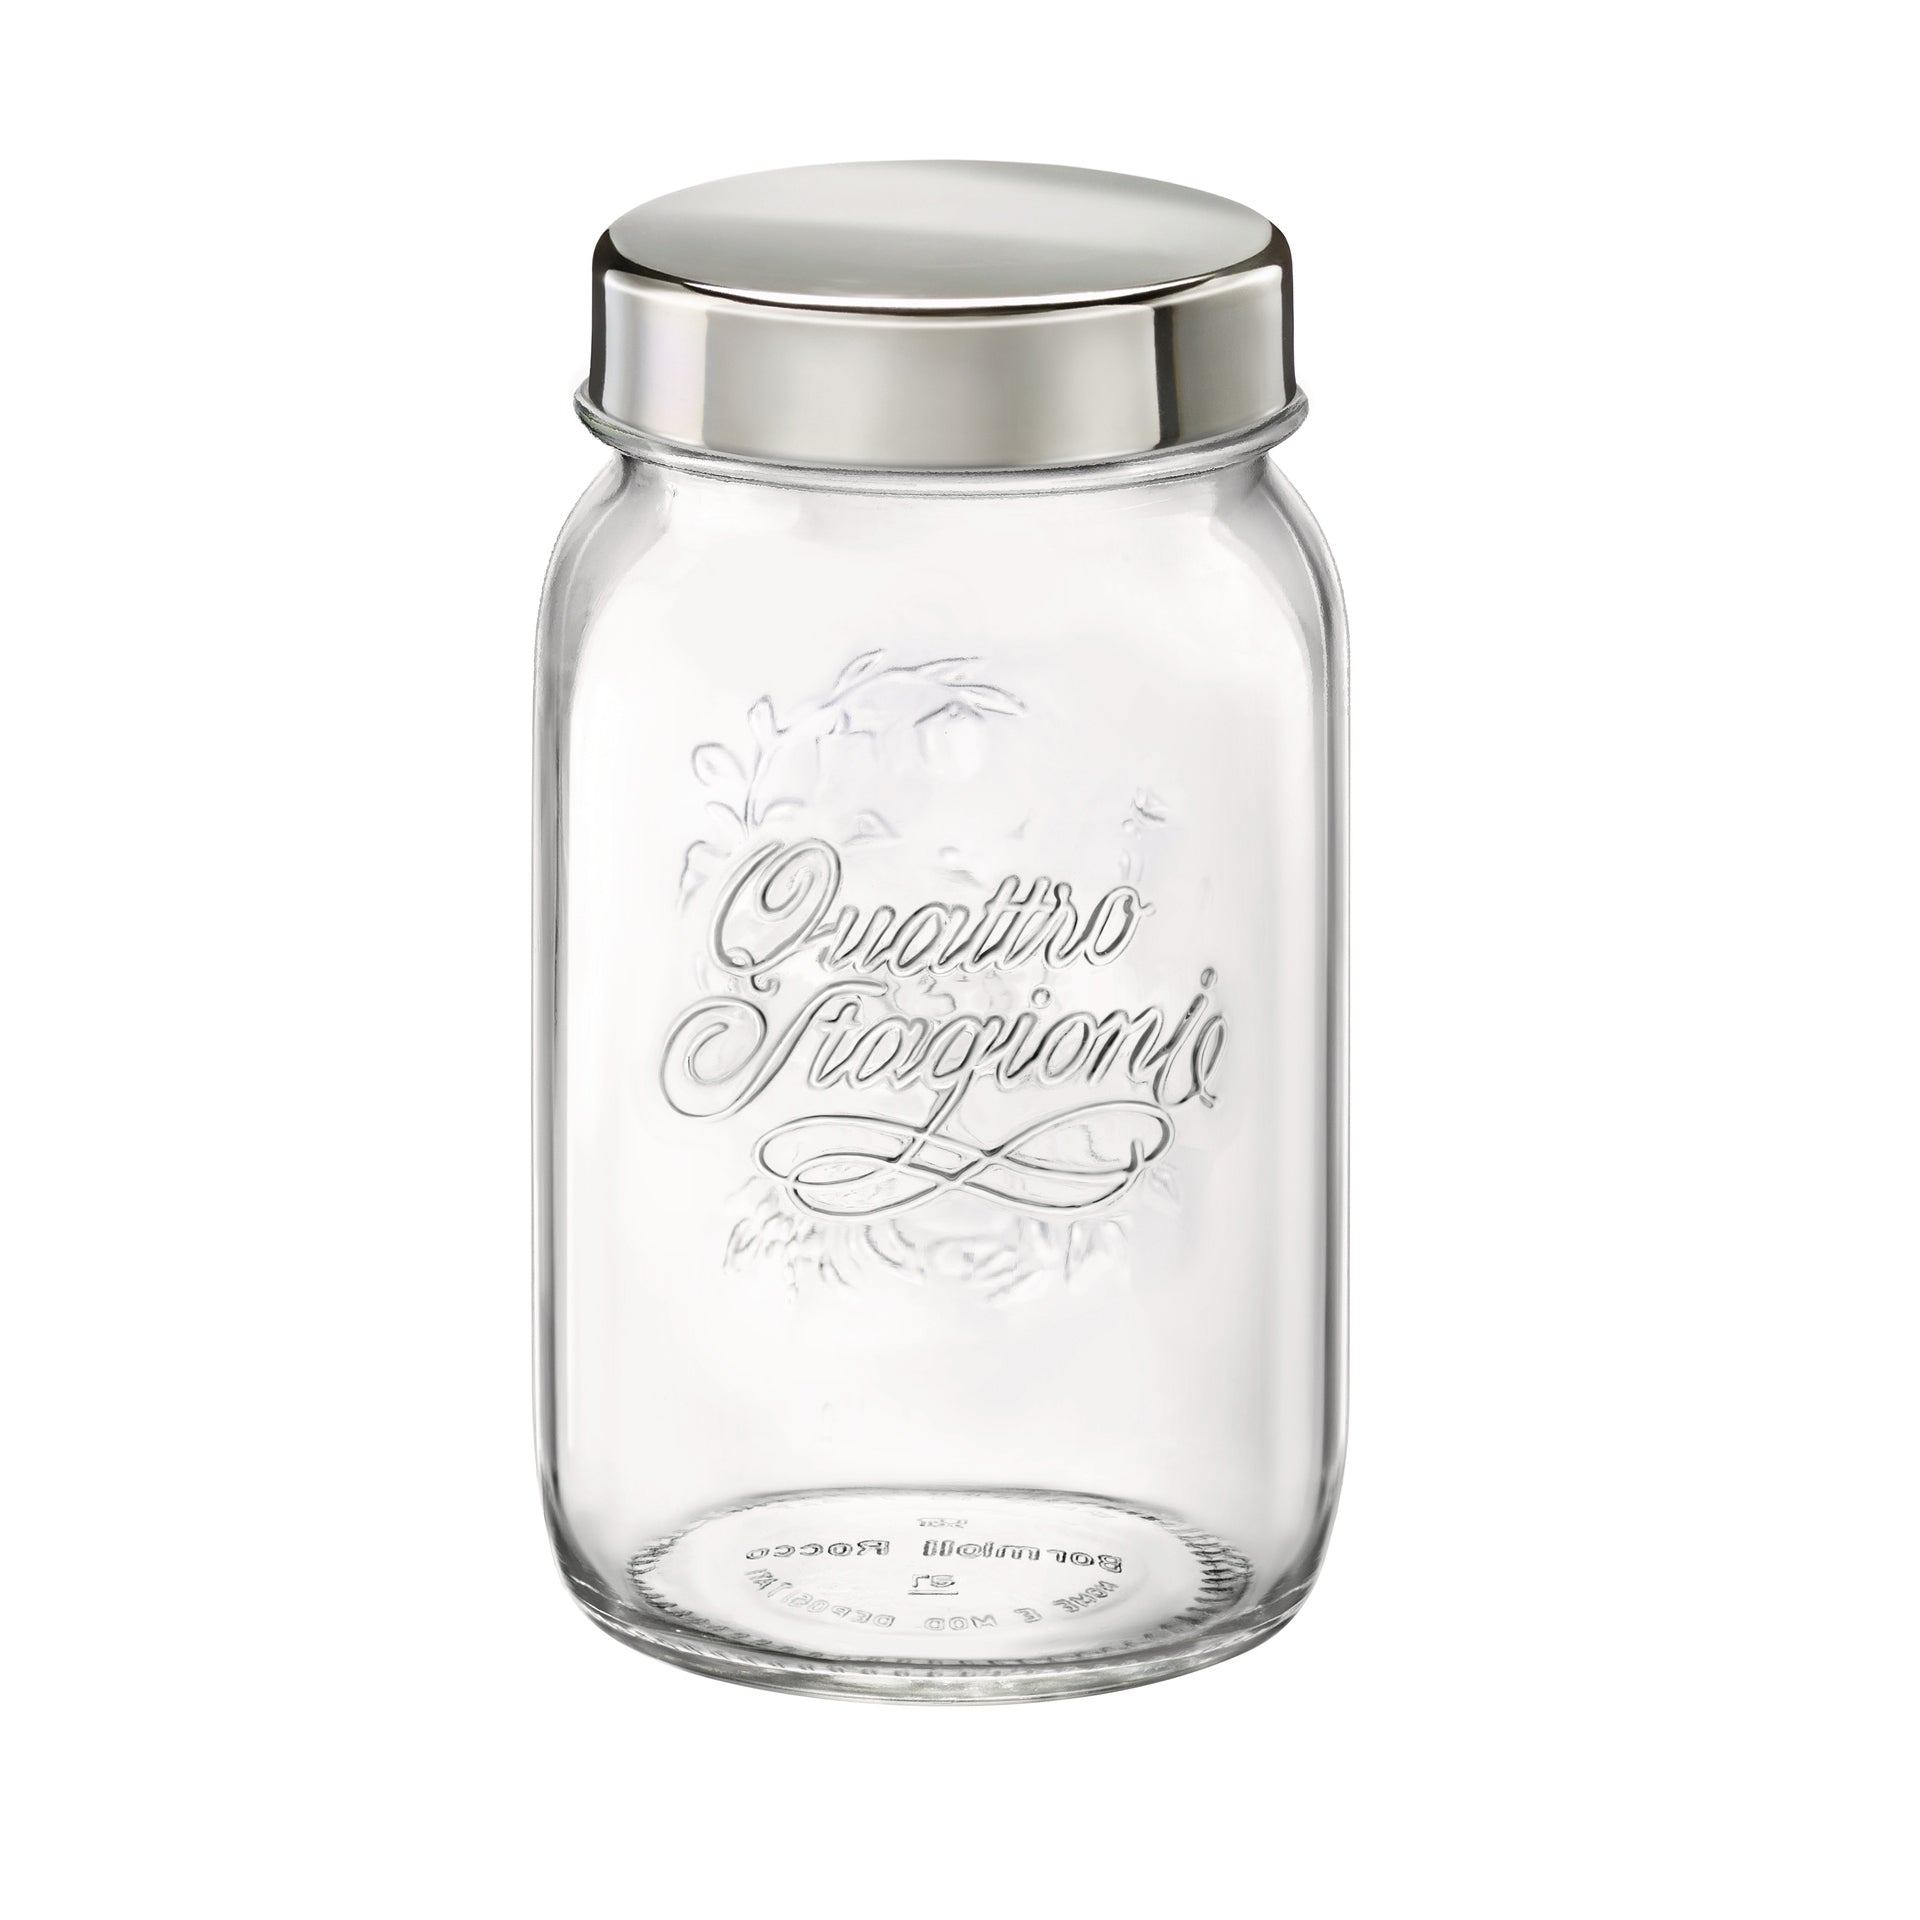 Quattro Stagioni 33.75 oz. Jar with Stainless Steel Lid (Set of 12)